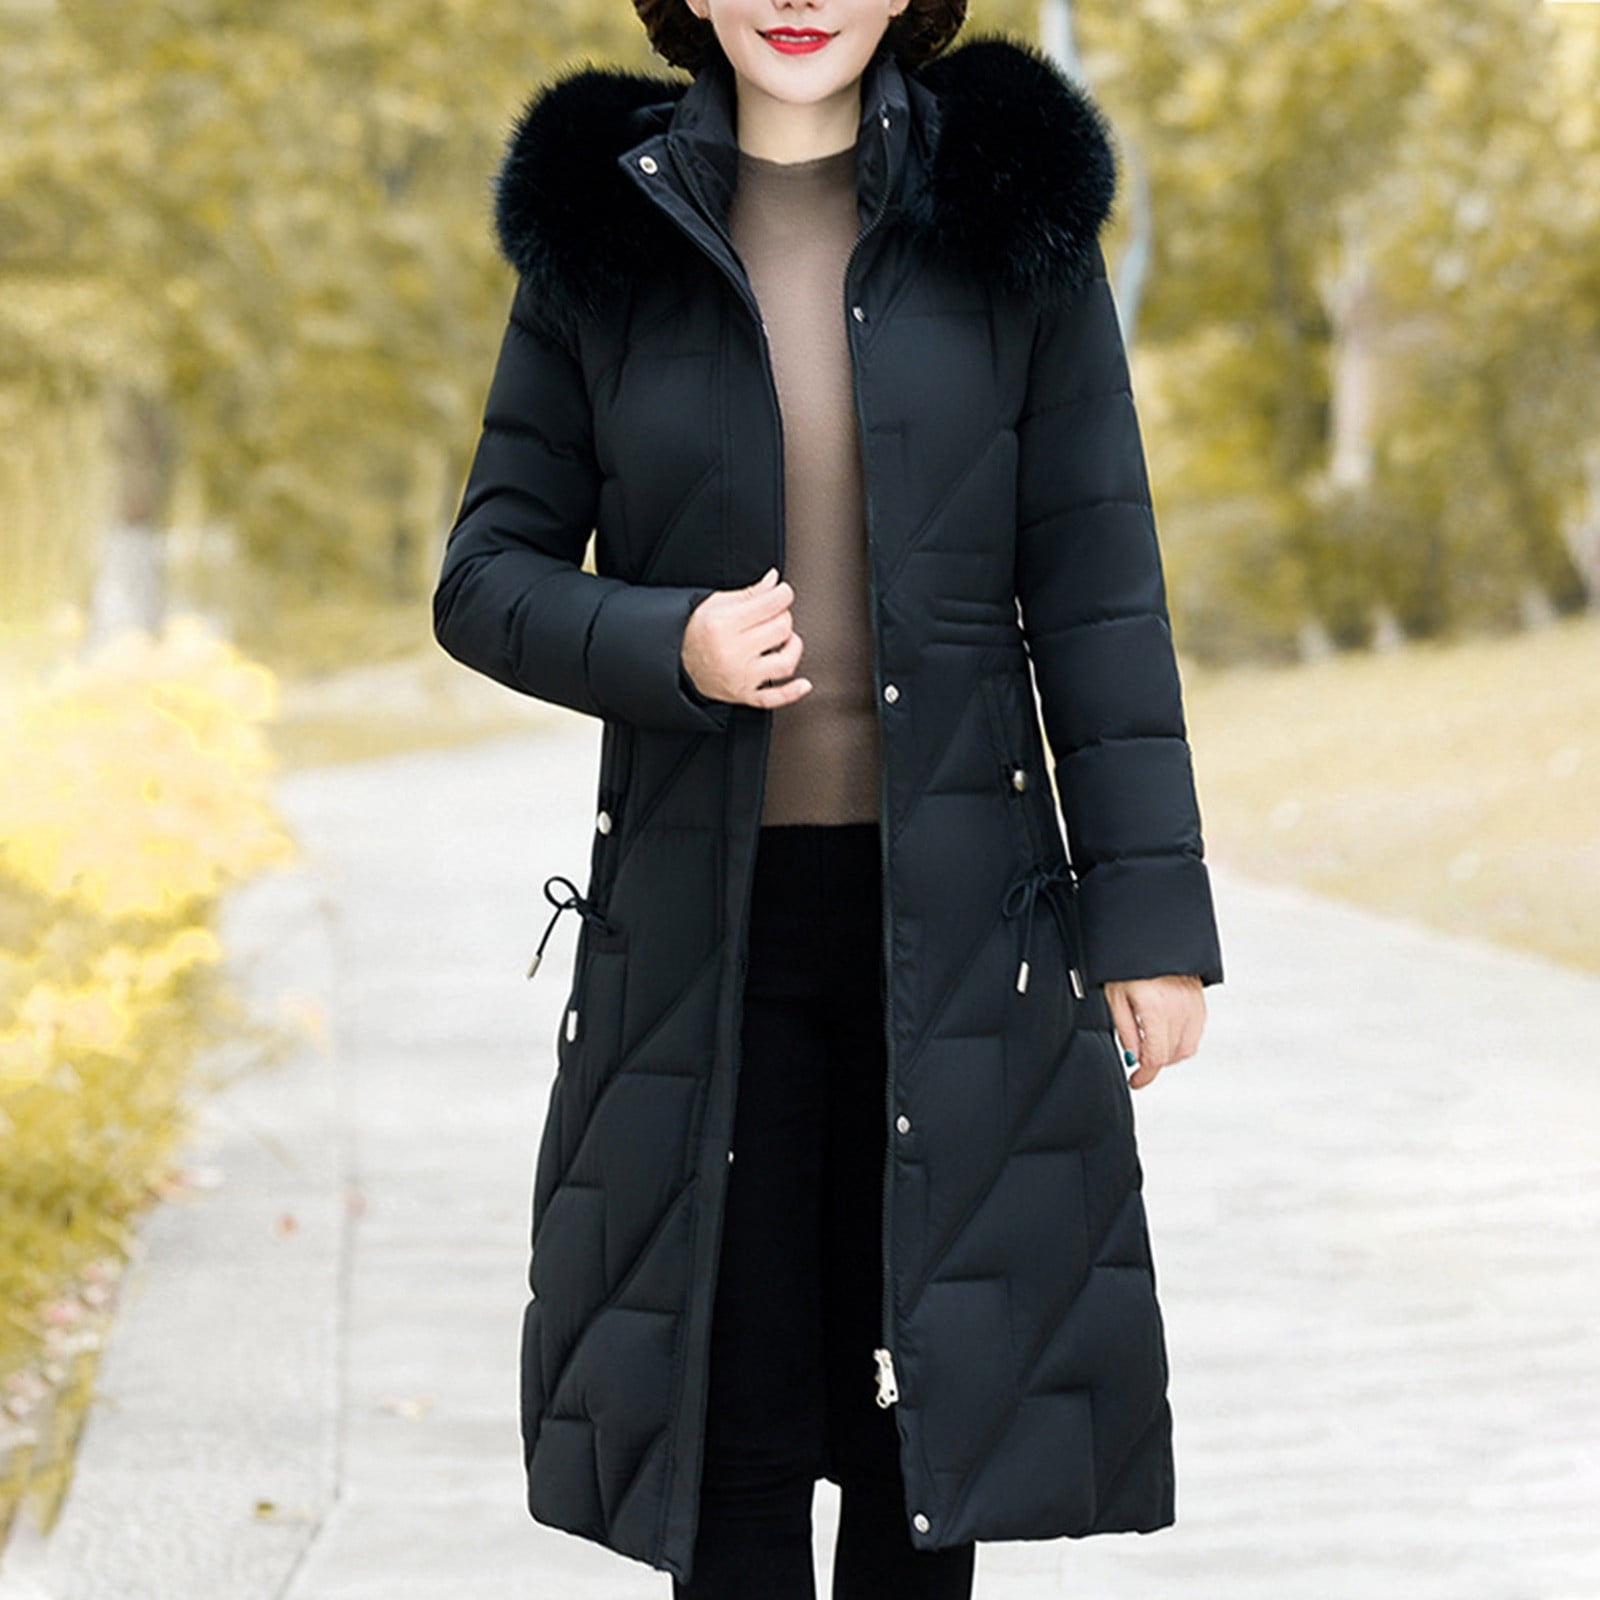 Aboser Plus Size Winter Coats for Women With Faux Fur Collar Long ...